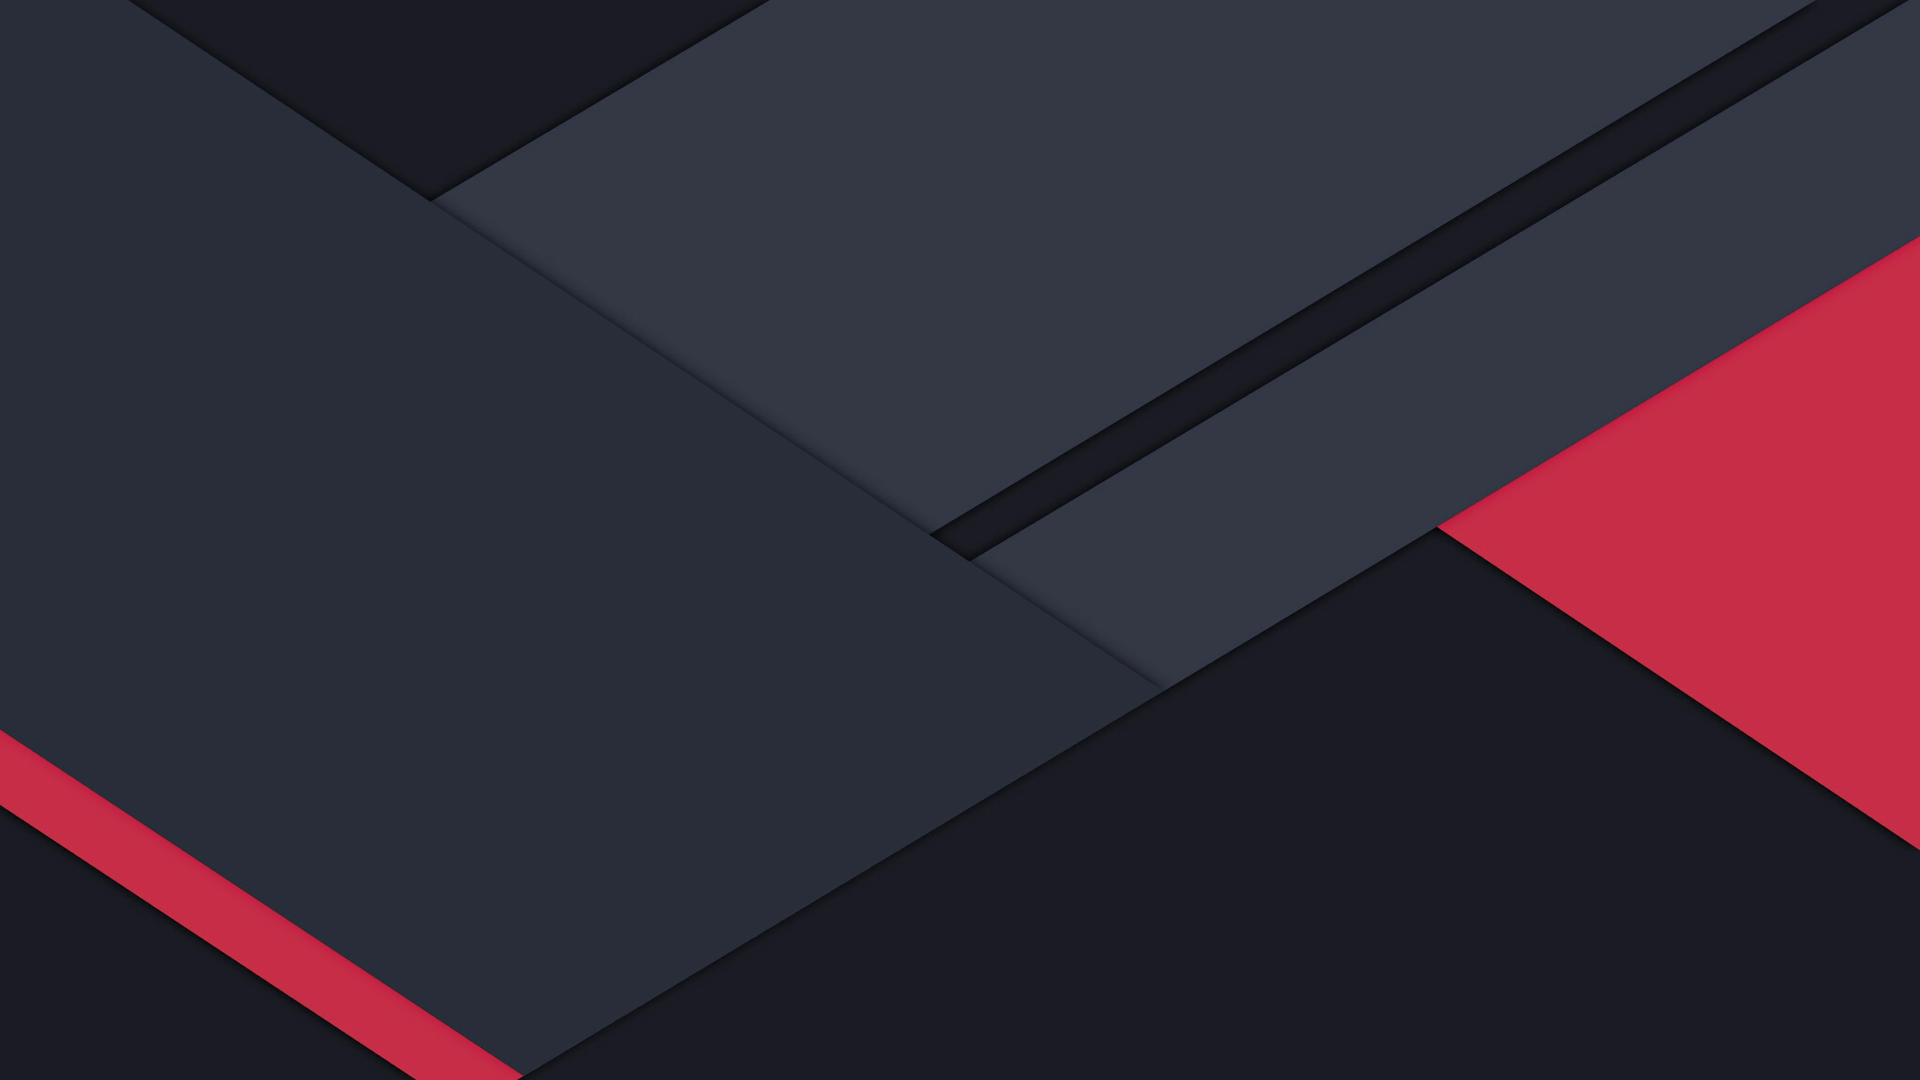 material_design_wallpaper_red_034_by_charlie_henson-daa22ts